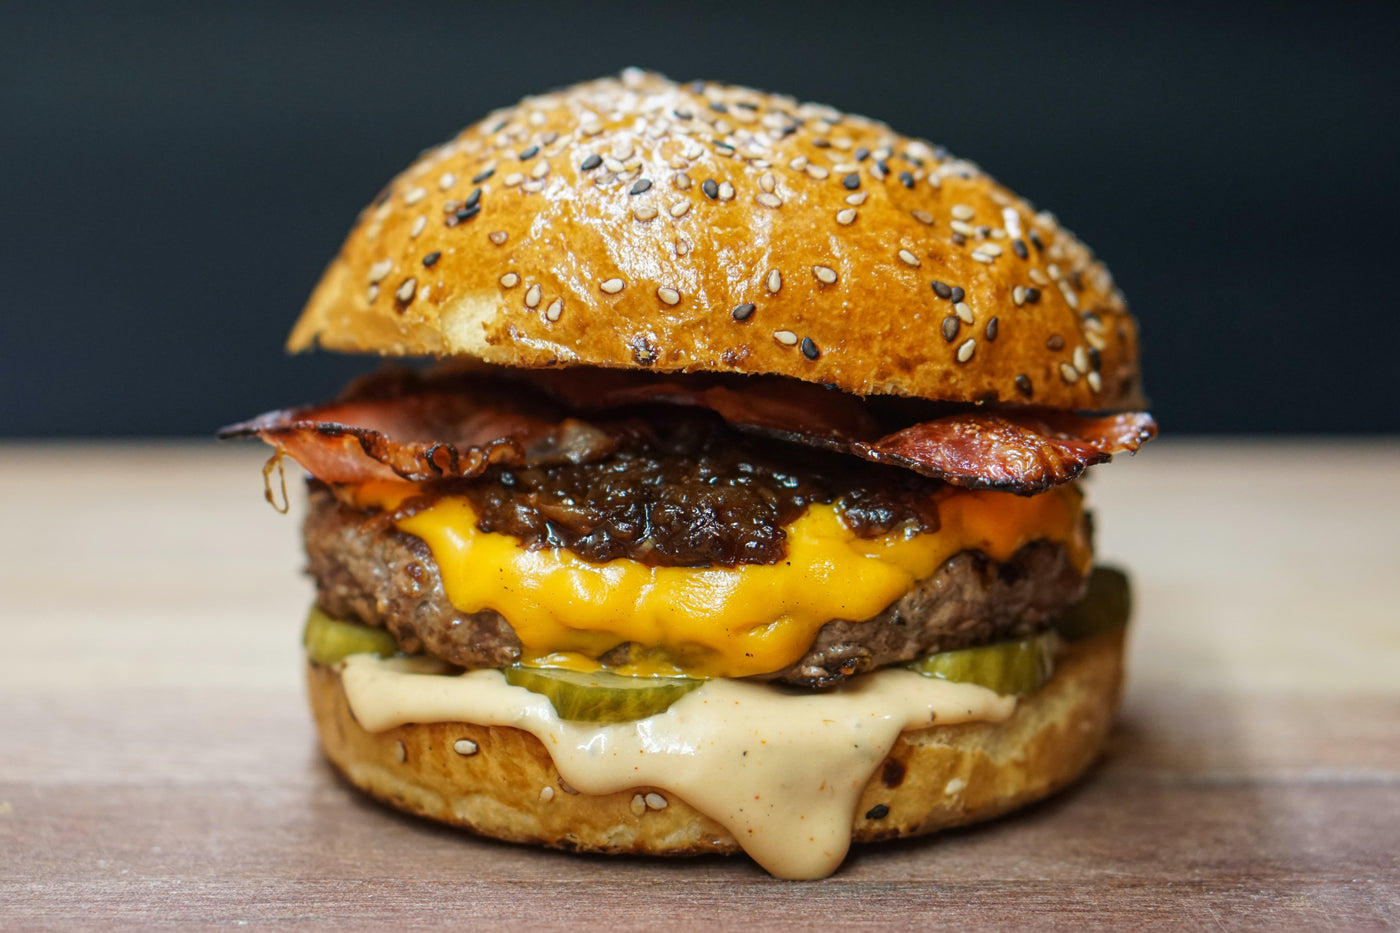 Eats: BBQ Grilled Bacon Burgers